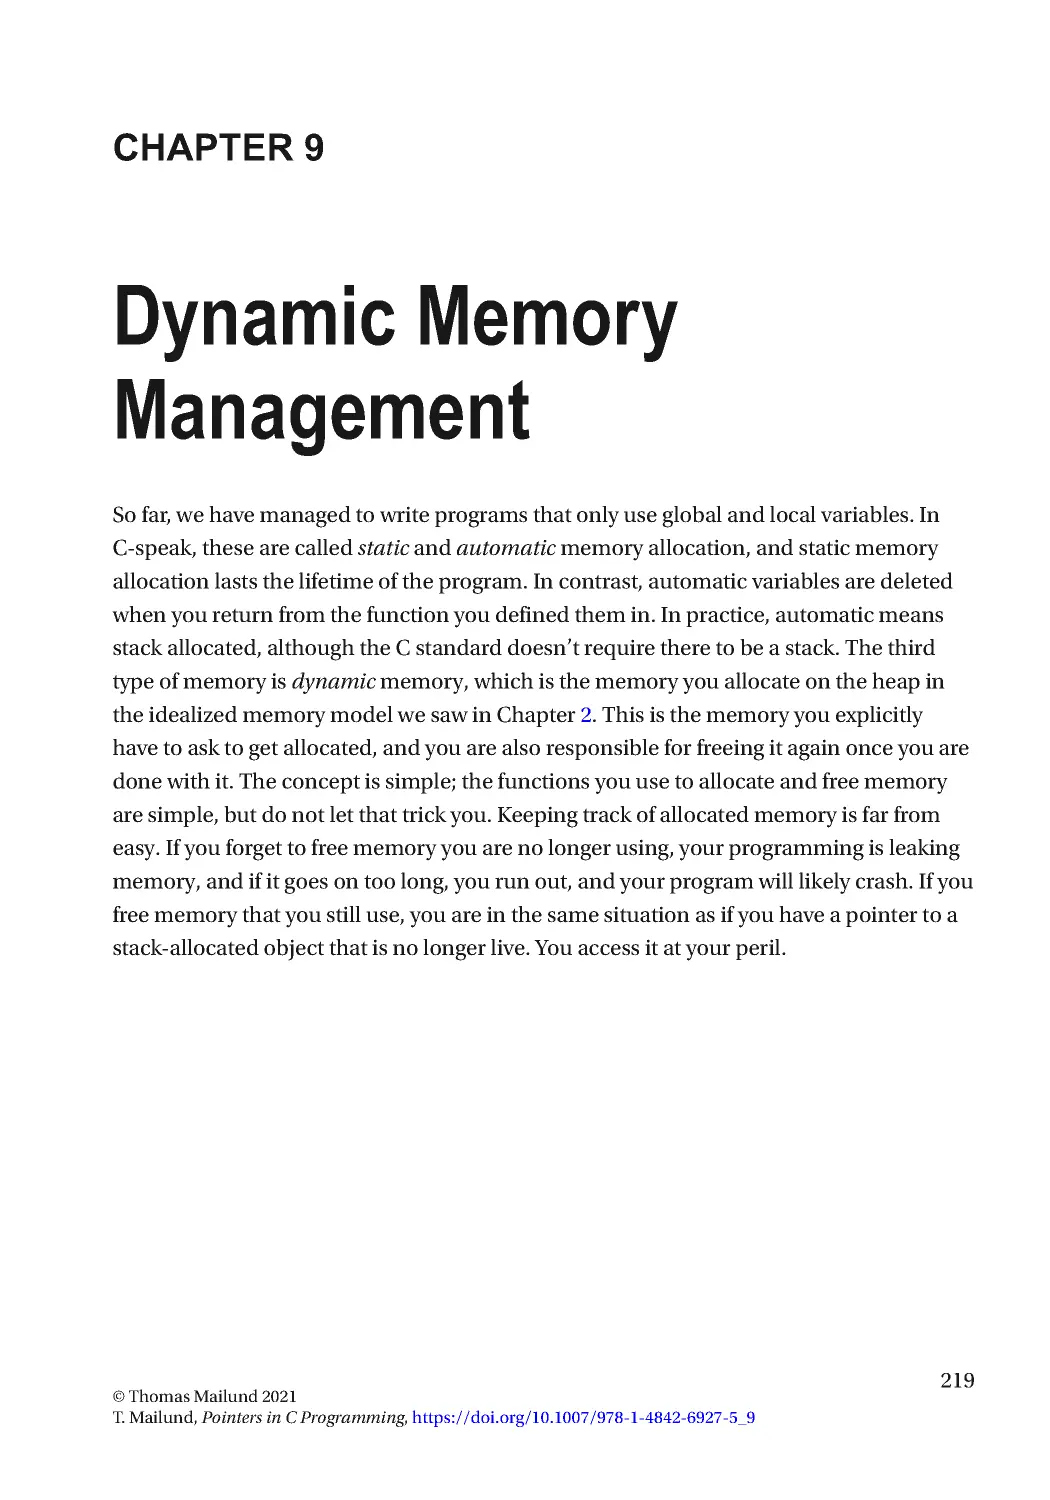 Chapter 9: Dynamic Memory Management